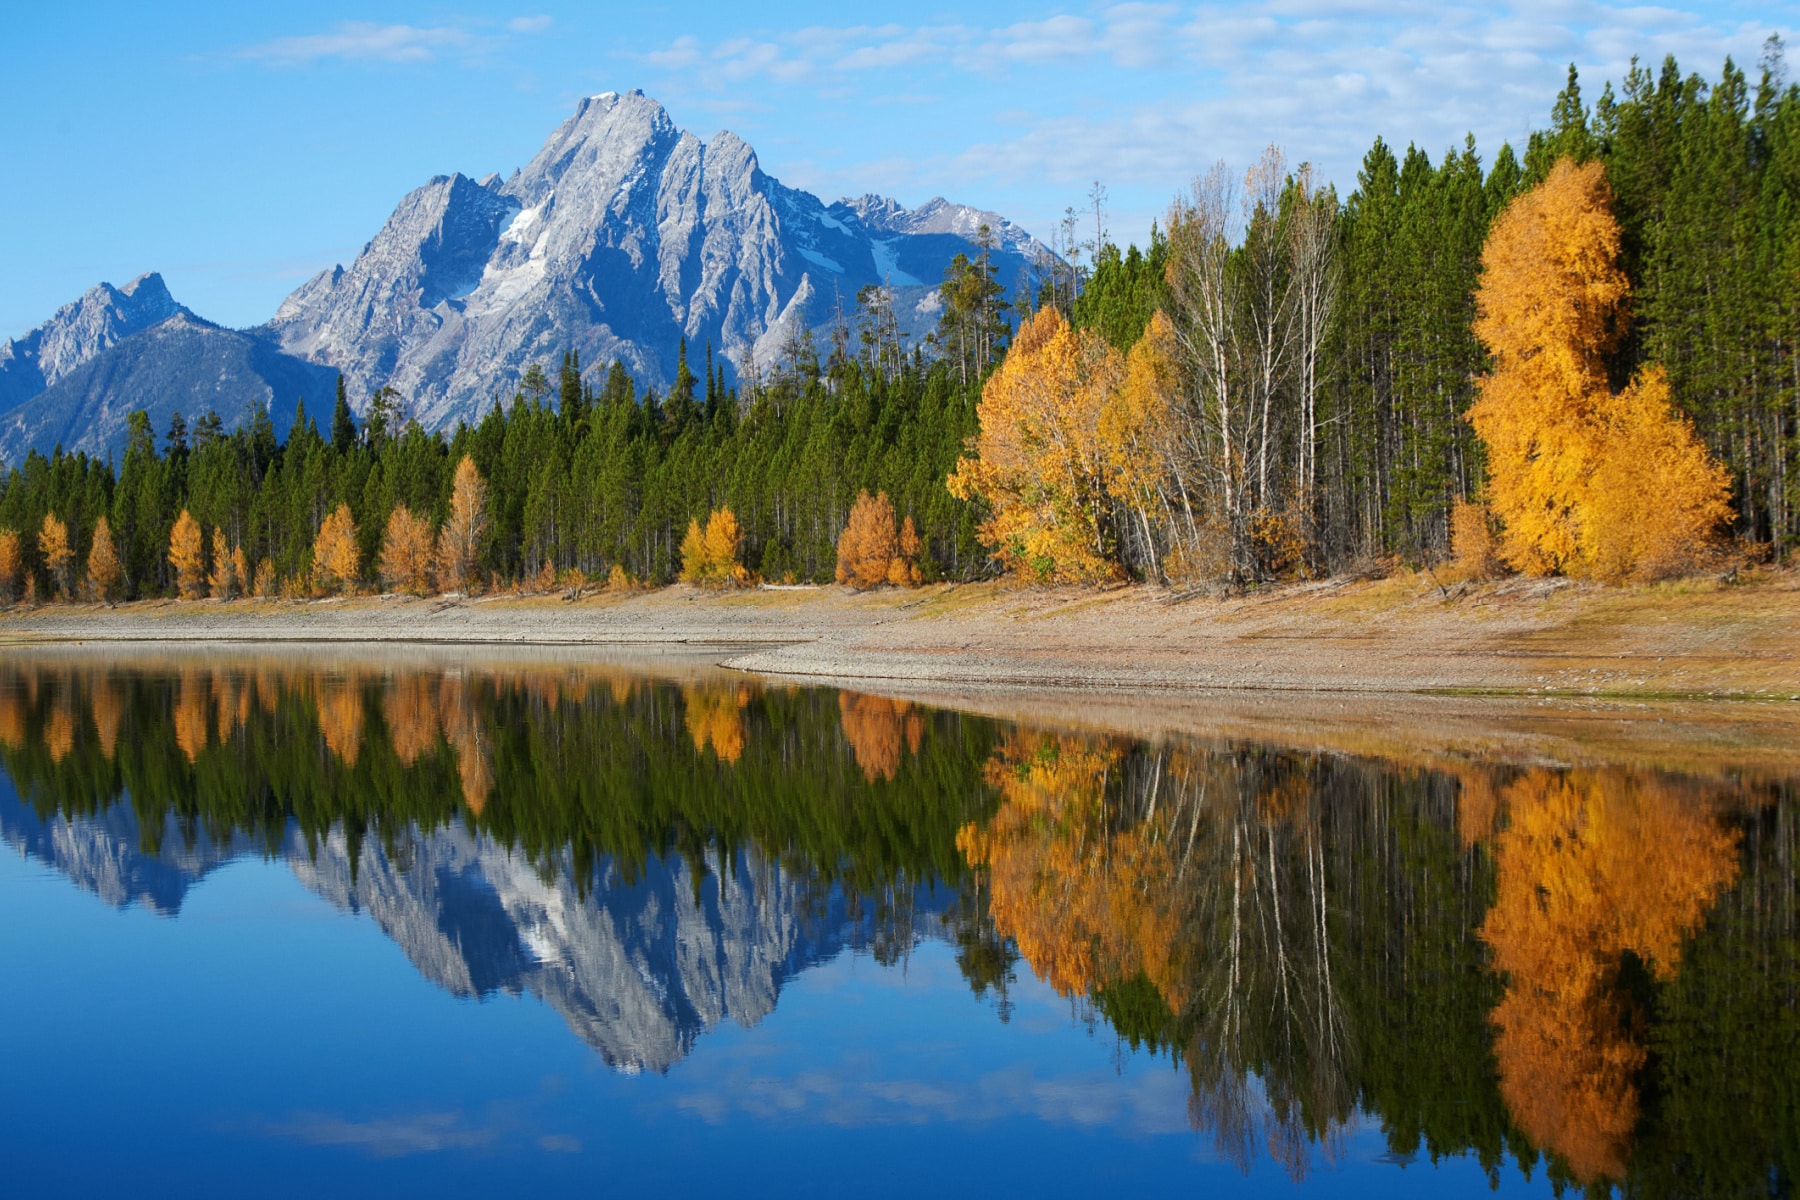 Mountains and fall foliage reflect in a lake at Yellowstone in the fall.